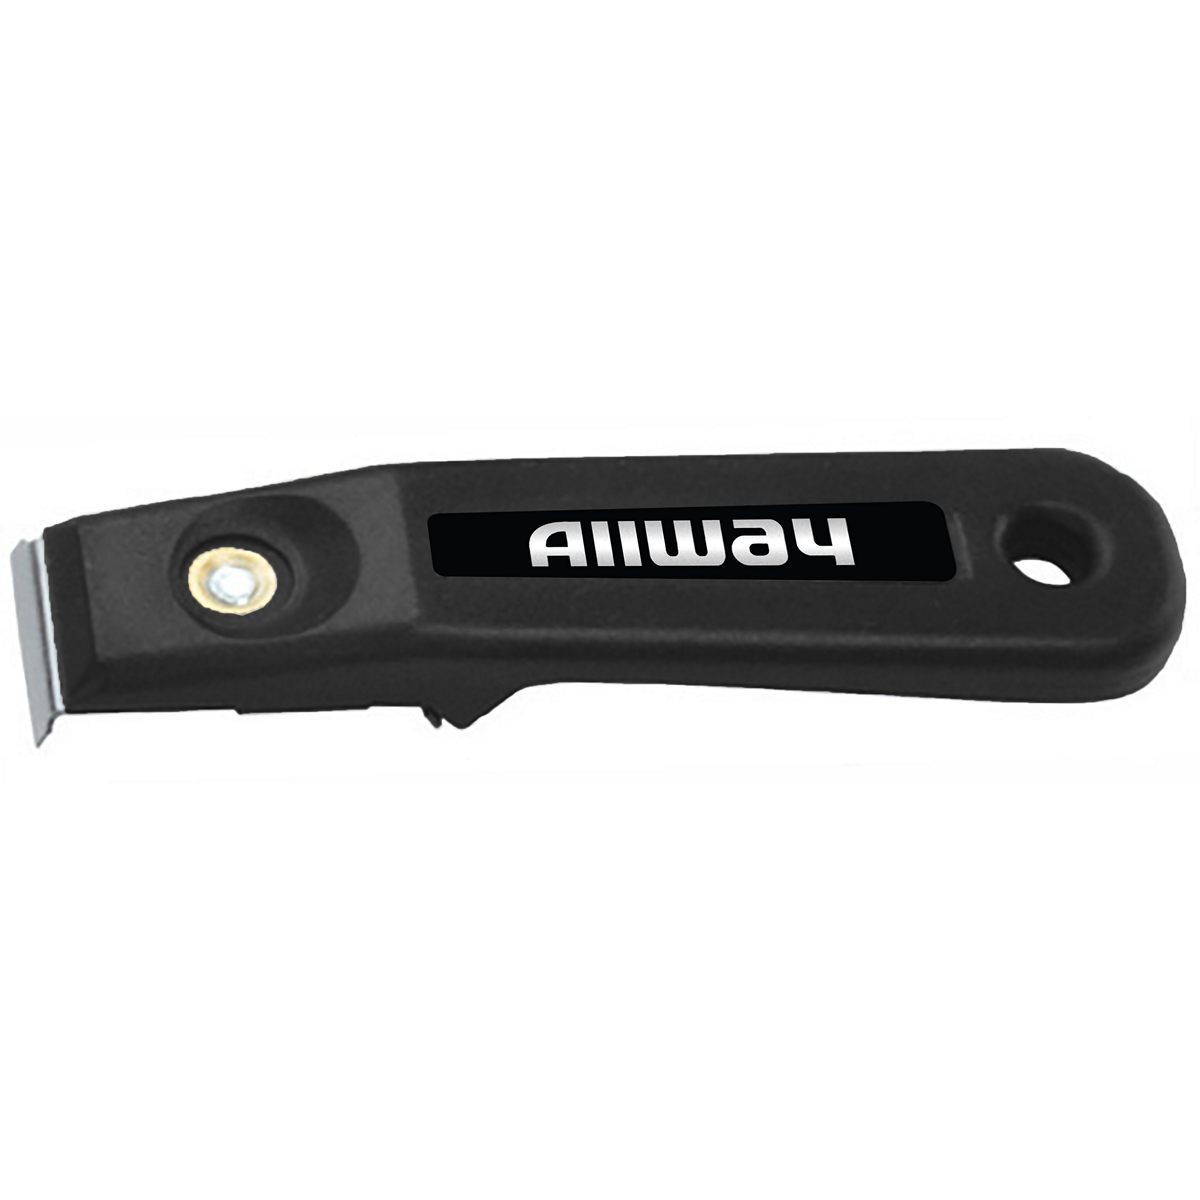 CS6) Soft Grip Contour Scraper Set W/6 Blades, Carded » ALLWAY® The Tools  You Ask For By Name